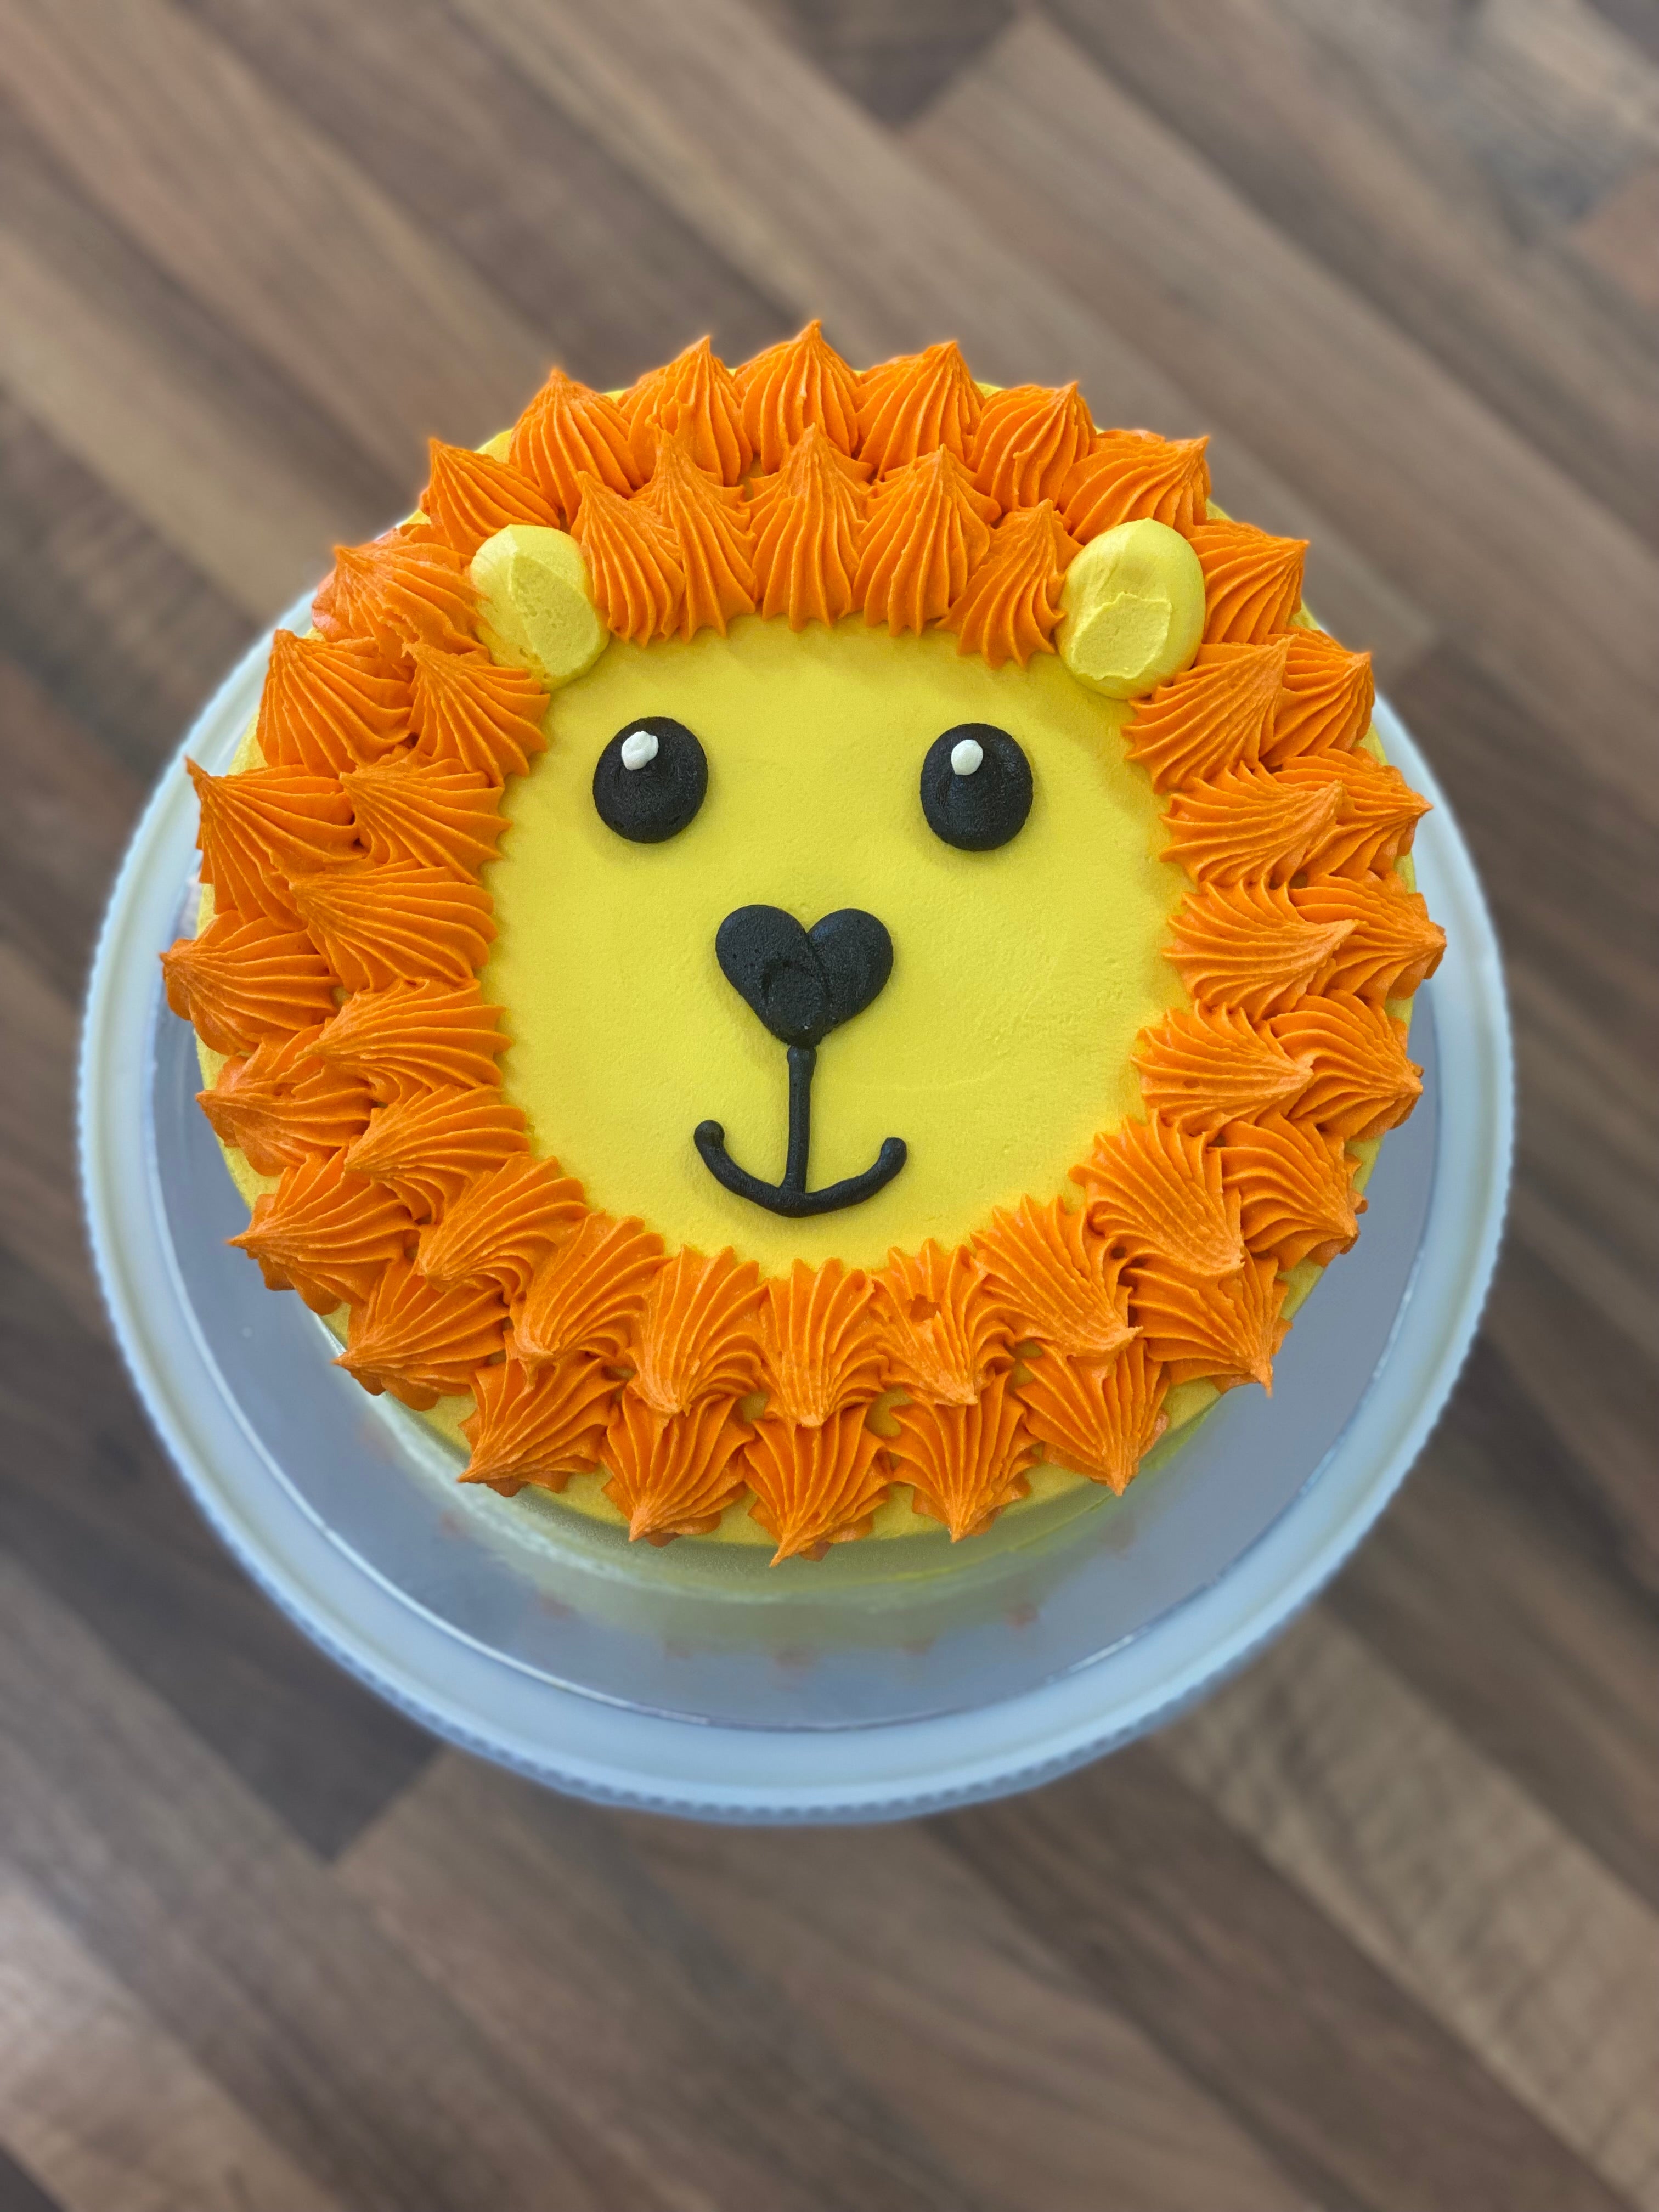 Lion - Decorated Cake by Cakes ROCK!!! - CakesDecor